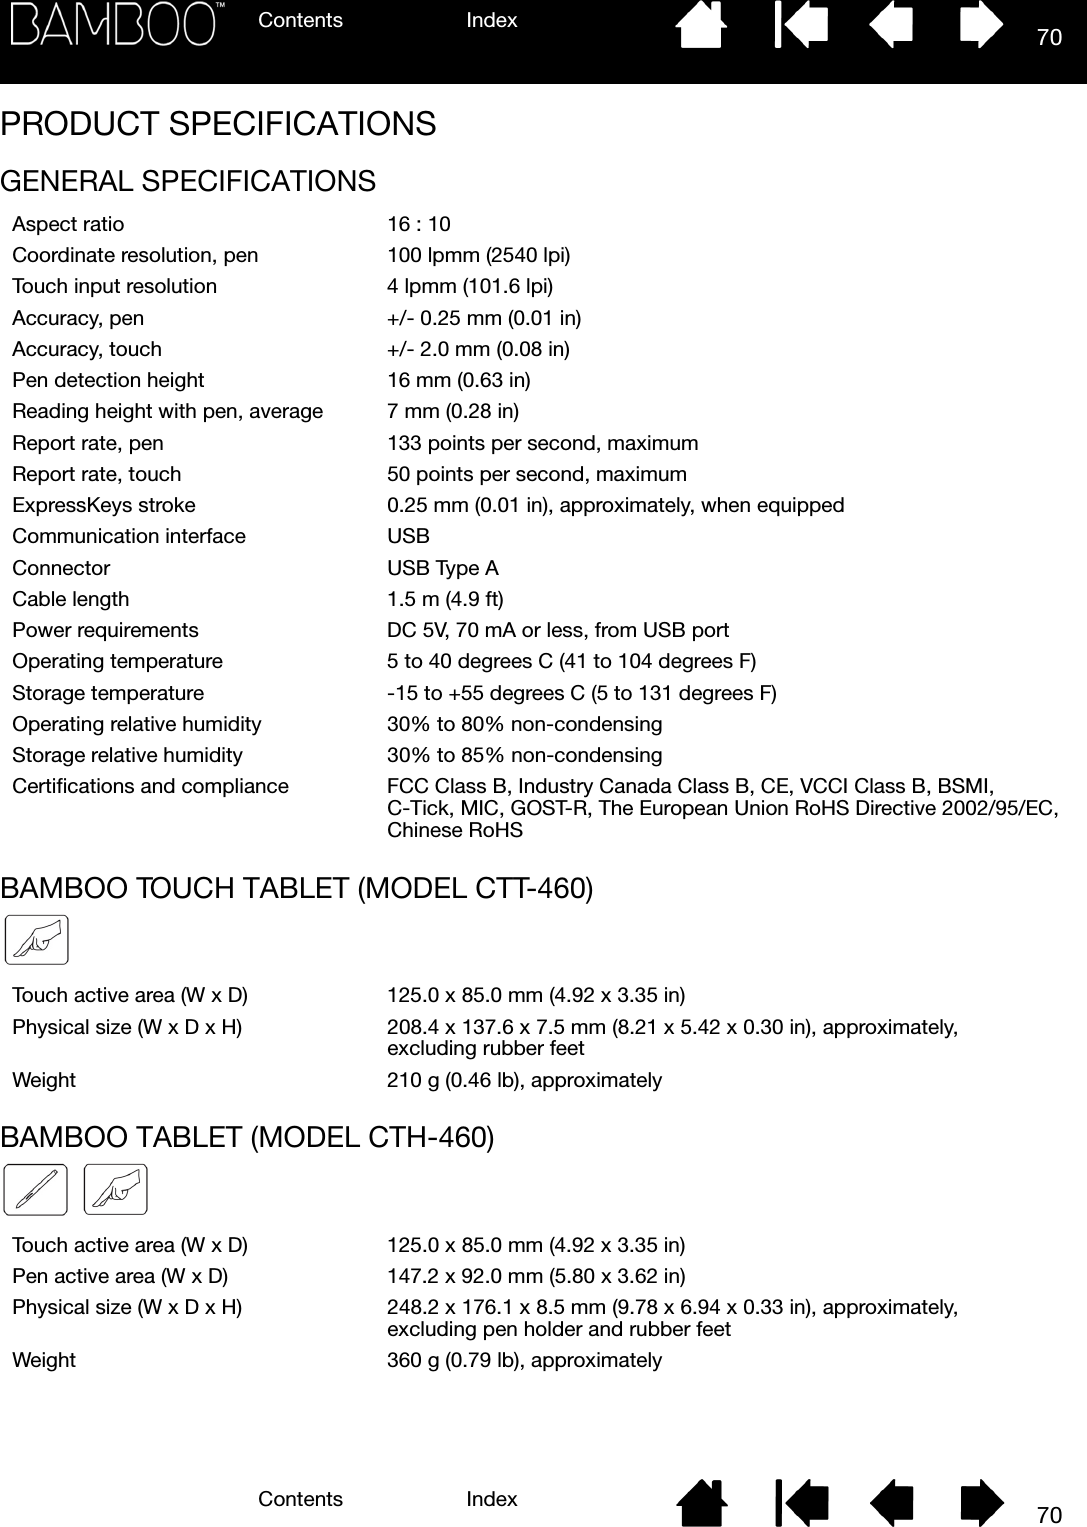 Contents IndexContents 70Index70PRODUCT SPECIFICATIONSGENERAL SPECIFICATIONSBAMBOO TOUCH TABLET (MODEL CTT-460)BAMBOO TABLET (MODEL CTH-460)Aspect ratio 16 : 10Coordinate resolution, pen 100 lpmm (2540 lpi)Touch input resolution 4 lpmm (101.6 lpi)Accuracy, pen +/- 0.25 mm (0.01 in)Accuracy, touch +/- 2.0 mm (0.08 in)Pen detection height 16 mm (0.63 in)Reading height with pen, average 7 mm (0.28 in)Report rate, pen 133 points per second, maximumReport rate, touch 50 points per second, maximumExpressKeys stroke 0.25 mm (0.01 in), approximately, when equippedCommunication interface USBConnector USB Type ACable length 1.5 m (4.9 ft)Power requirements DC 5V, 70 mA or less, from USB portOperating temperature 5 to 40 degrees C (41 to 104 degrees F)Storage temperature -15 to +55 degrees C (5 to 131 degrees F)Operating relative humidity 30% to 80% non-condensingStorage relative humidity 30% to 85% non-condensingCertifications and compliance FCC Class B, Industry Canada Class B, CE, VCCI Class B, BSMI, C-Tick, MIC, GOST-R, The European Union RoHS Directive 2002/95/EC, Chinese RoHSTouch active area (W x D) 125.0 x 85.0 mm (4.92 x 3.35 in)Physical size (W x D x H) 208.4 x 137.6 x 7.5 mm (8.21 x 5.42 x 0.30 in), approximately, excluding rubber feetWeight 210 g (0.46 lb), approximatelyTouch active area (W x D) 125.0 x 85.0 mm (4.92 x 3.35 in)Pen active area (W x D) 147.2 x 92.0 mm (5.80 x 3.62 in)Physical size (W x D x H) 248.2 x 176.1 x 8.5 mm (9.78 x 6.94 x 0.33 in), approximately, excluding pen holder and rubber feetWeight 360 g (0.79 lb), approximately